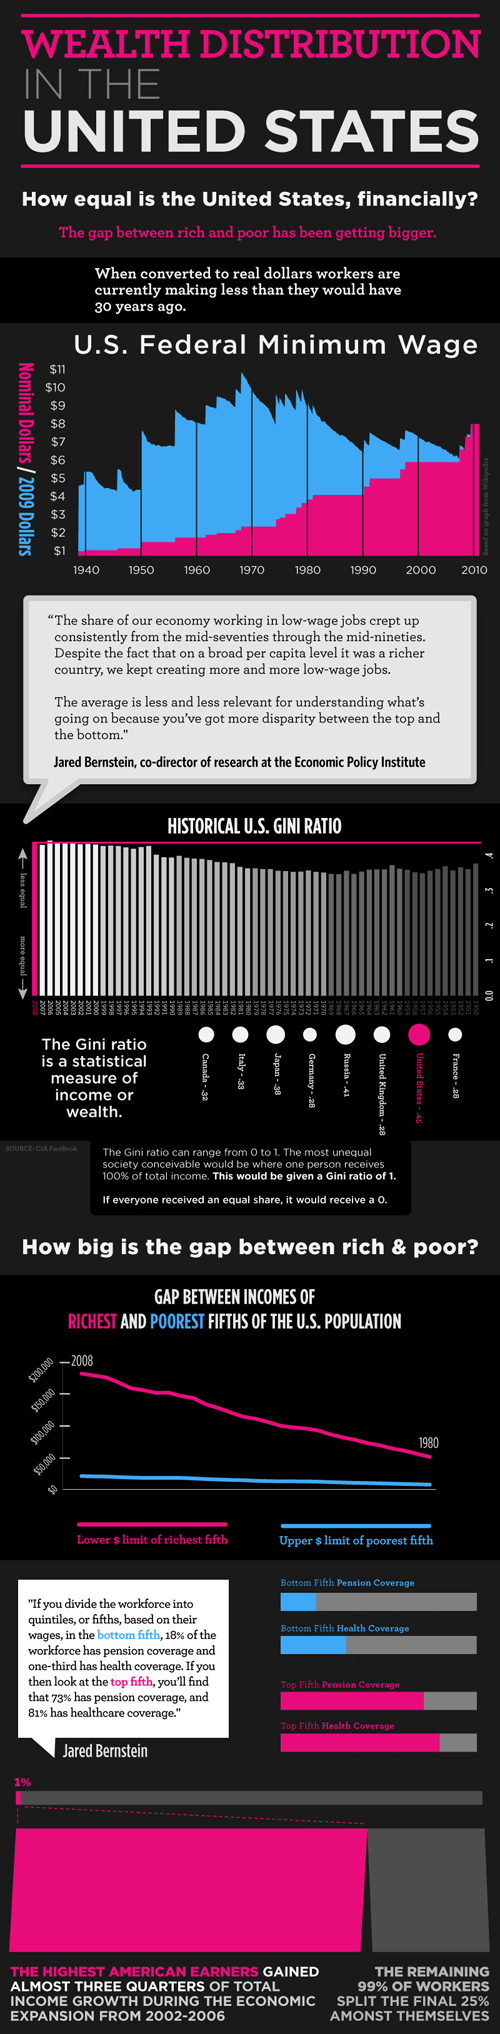 Wealth Distribution in the United States